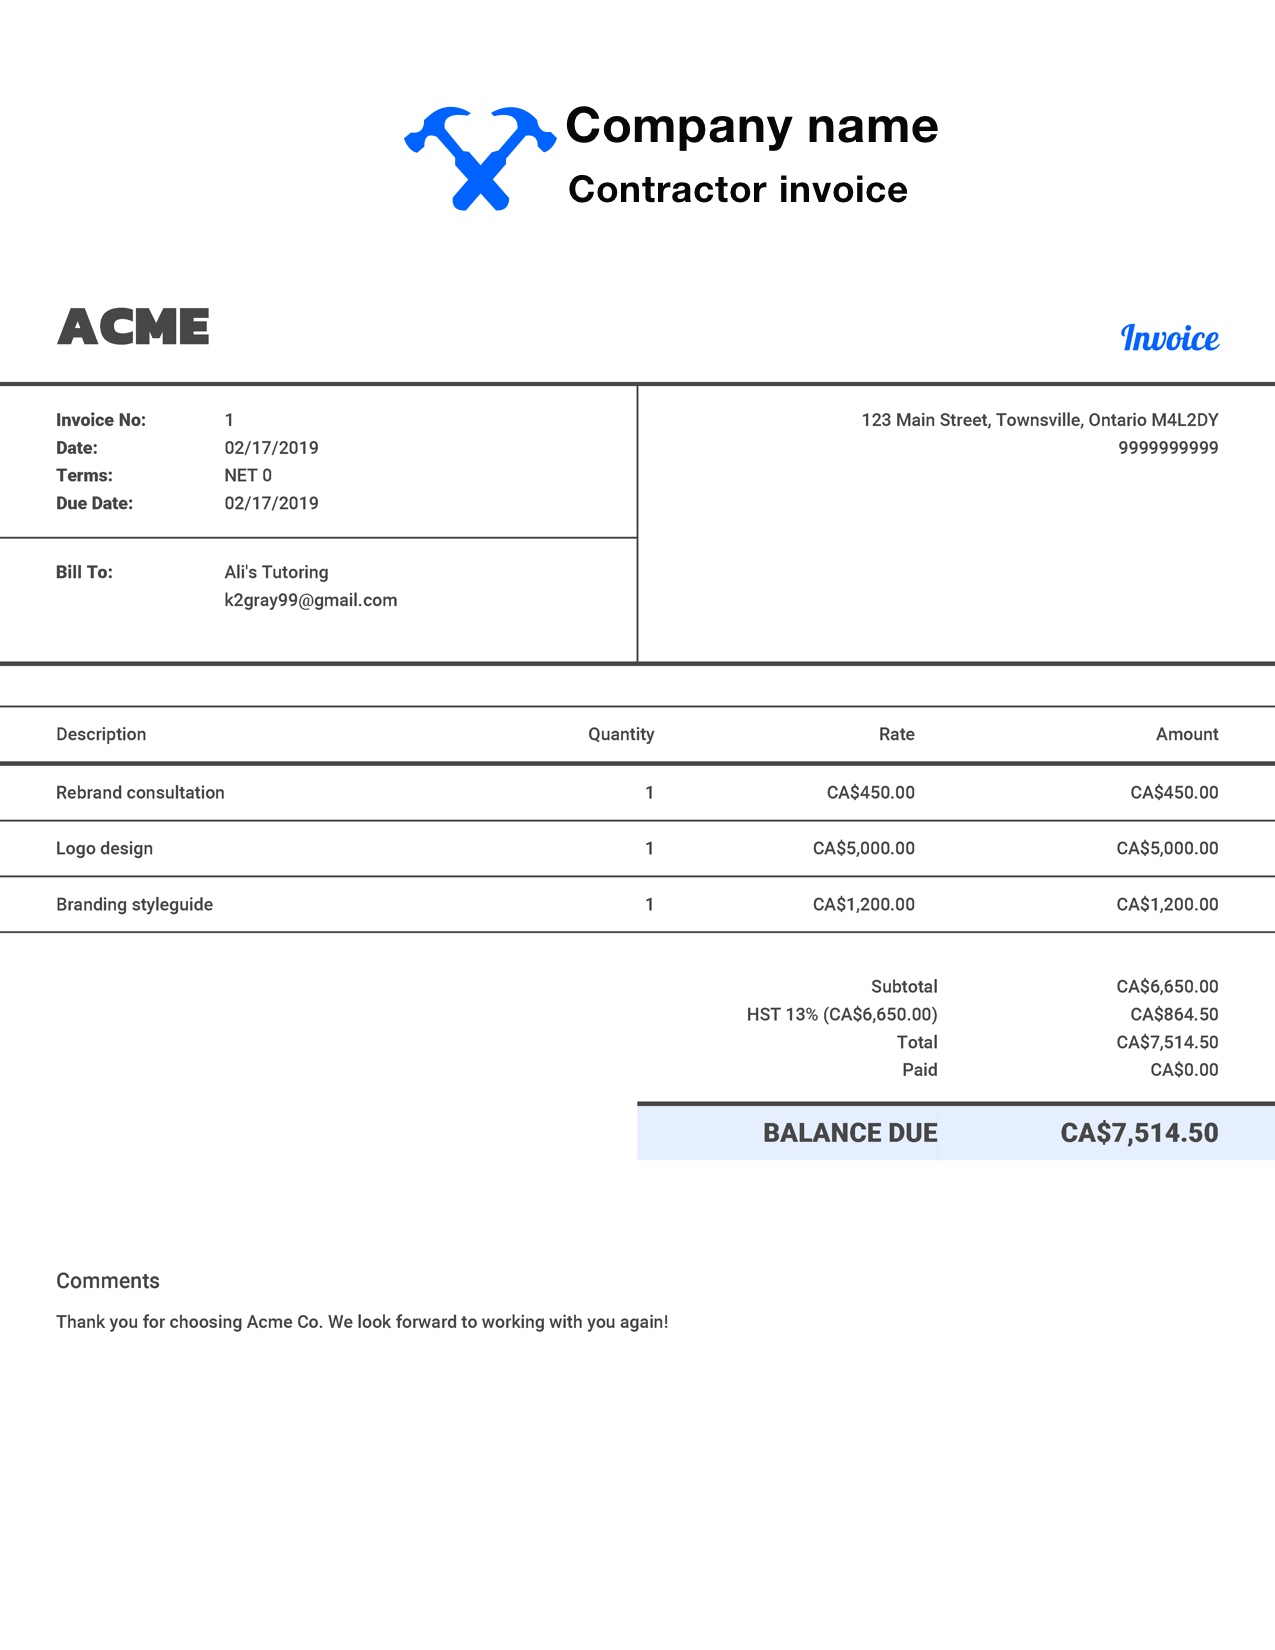 free-contractor-invoice-template-customize-and-send-in-90-seconds